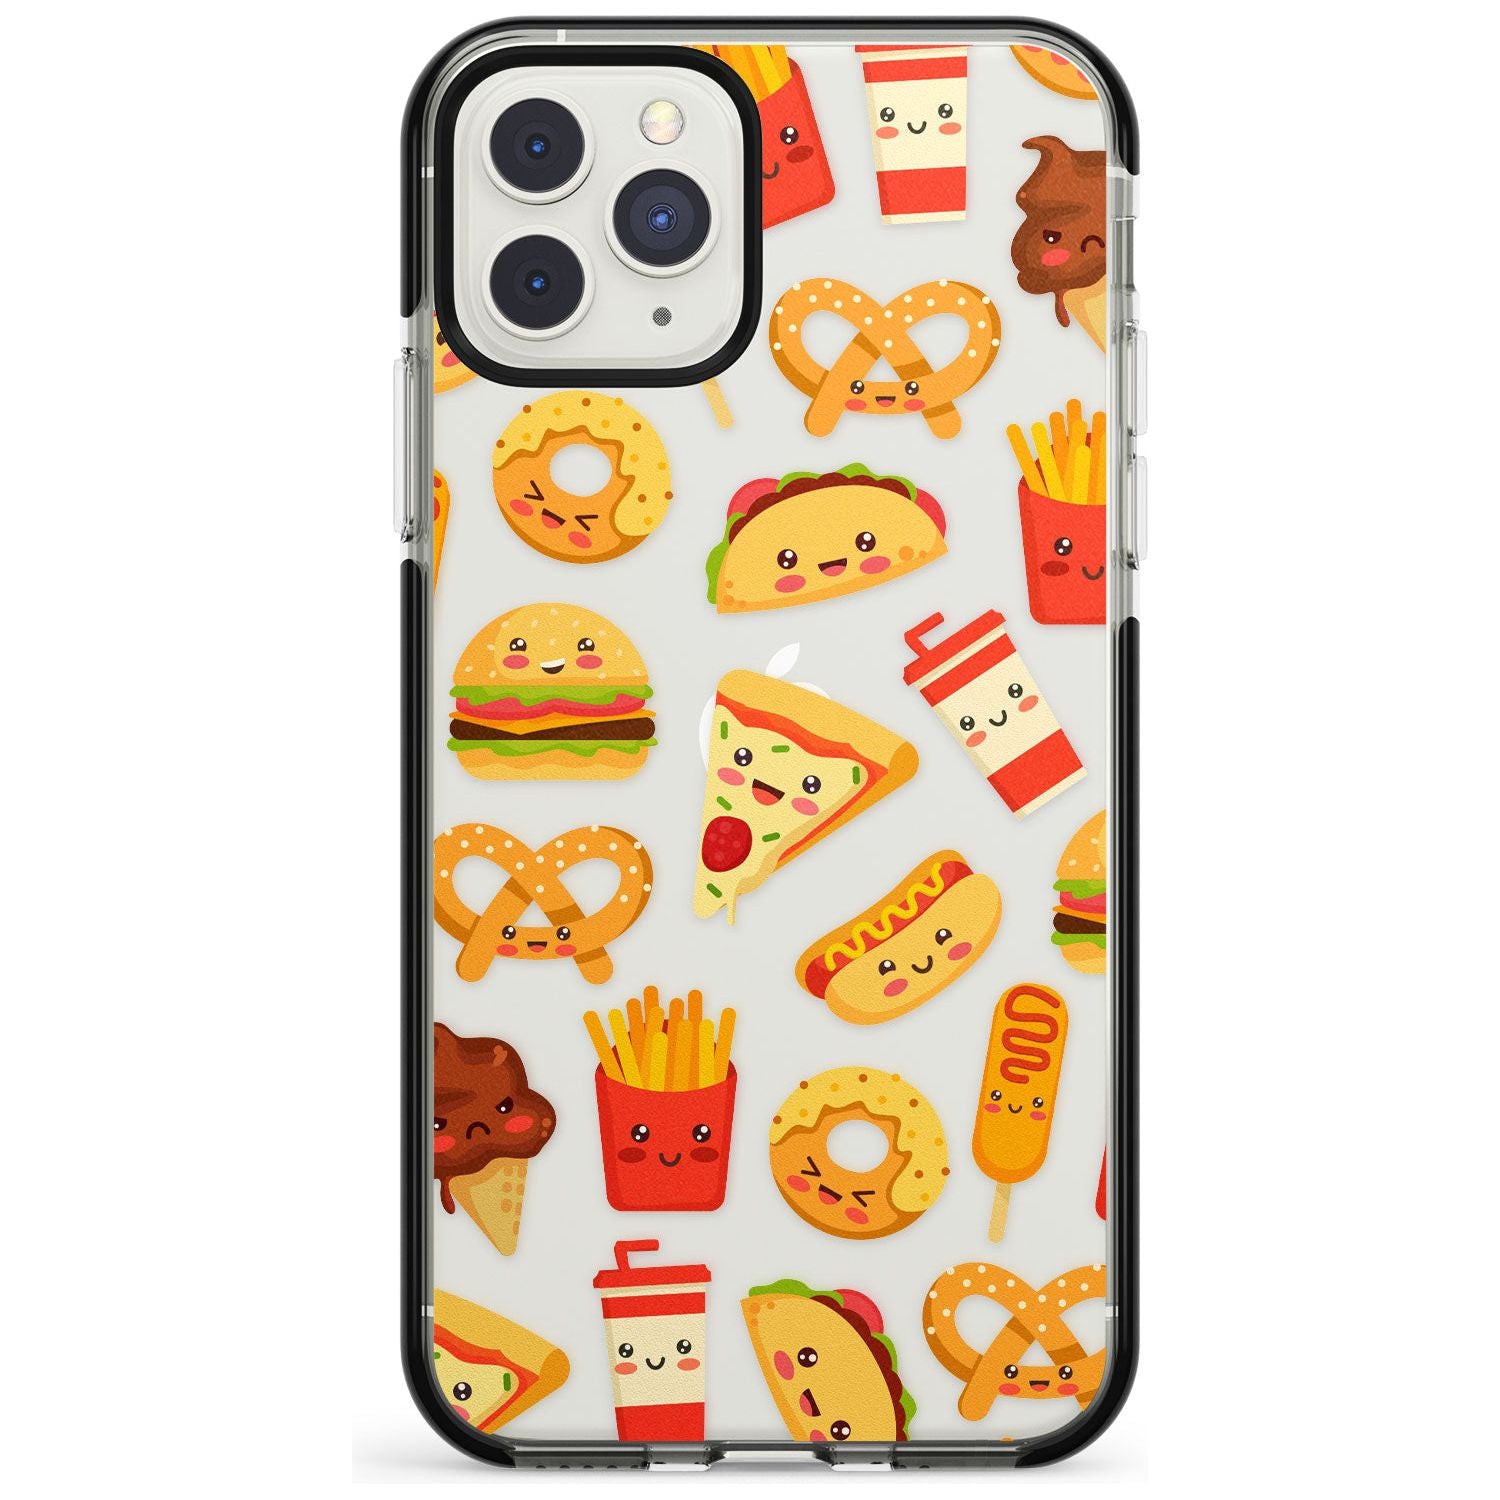 Fast Food Patterns Kawaii Fast Food Mix Phone Case iPhone 11 Pro Max / Black Impact Case,iPhone 11 Pro / Black Impact Case,iPhone 12 Pro Max / Black Impact Case Blanc Space